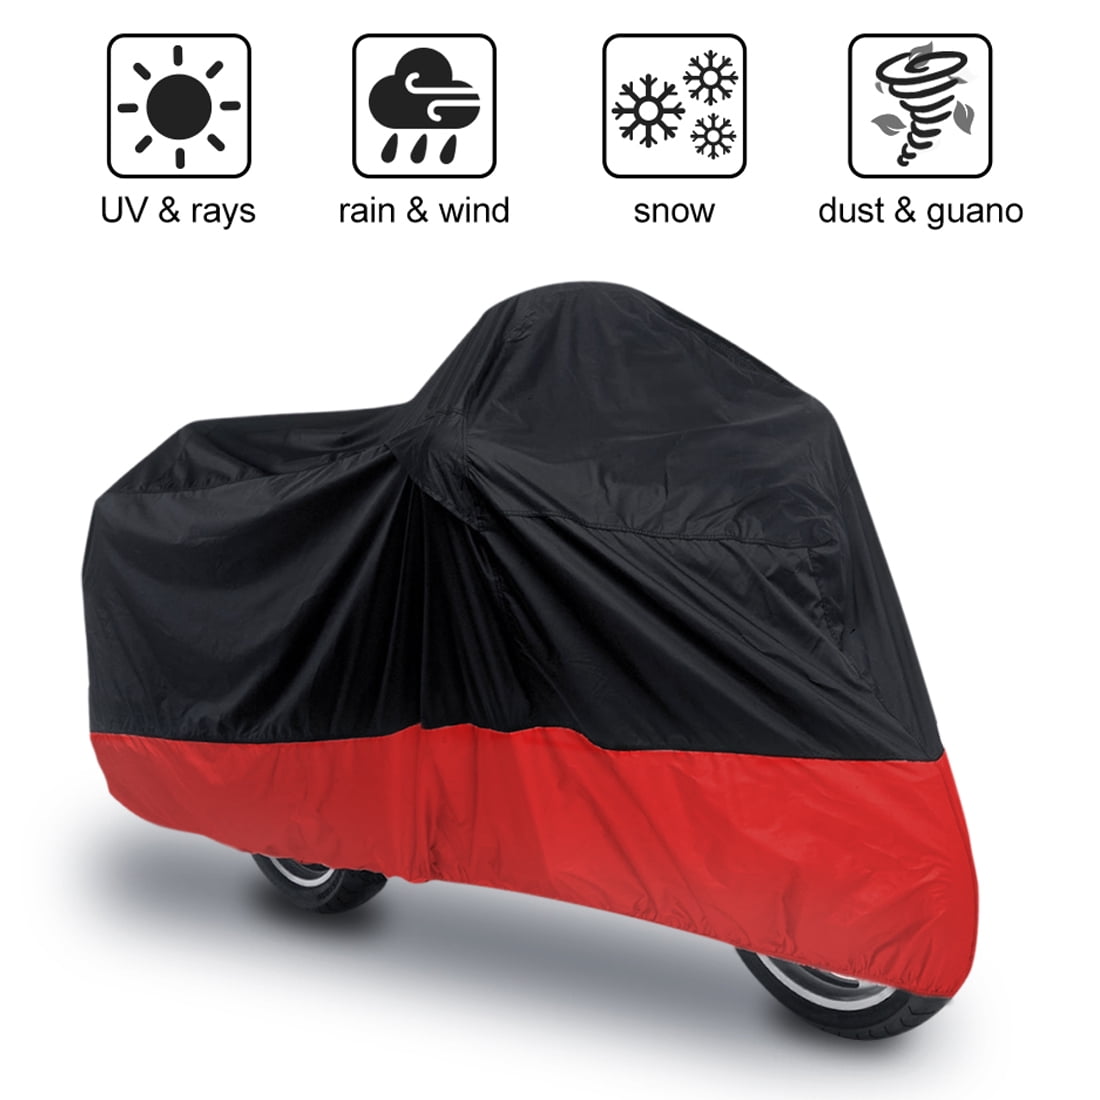 Waterproof Sun Snow Rain Cover For Motorcycle Motorbike Scooter Protector Size S 